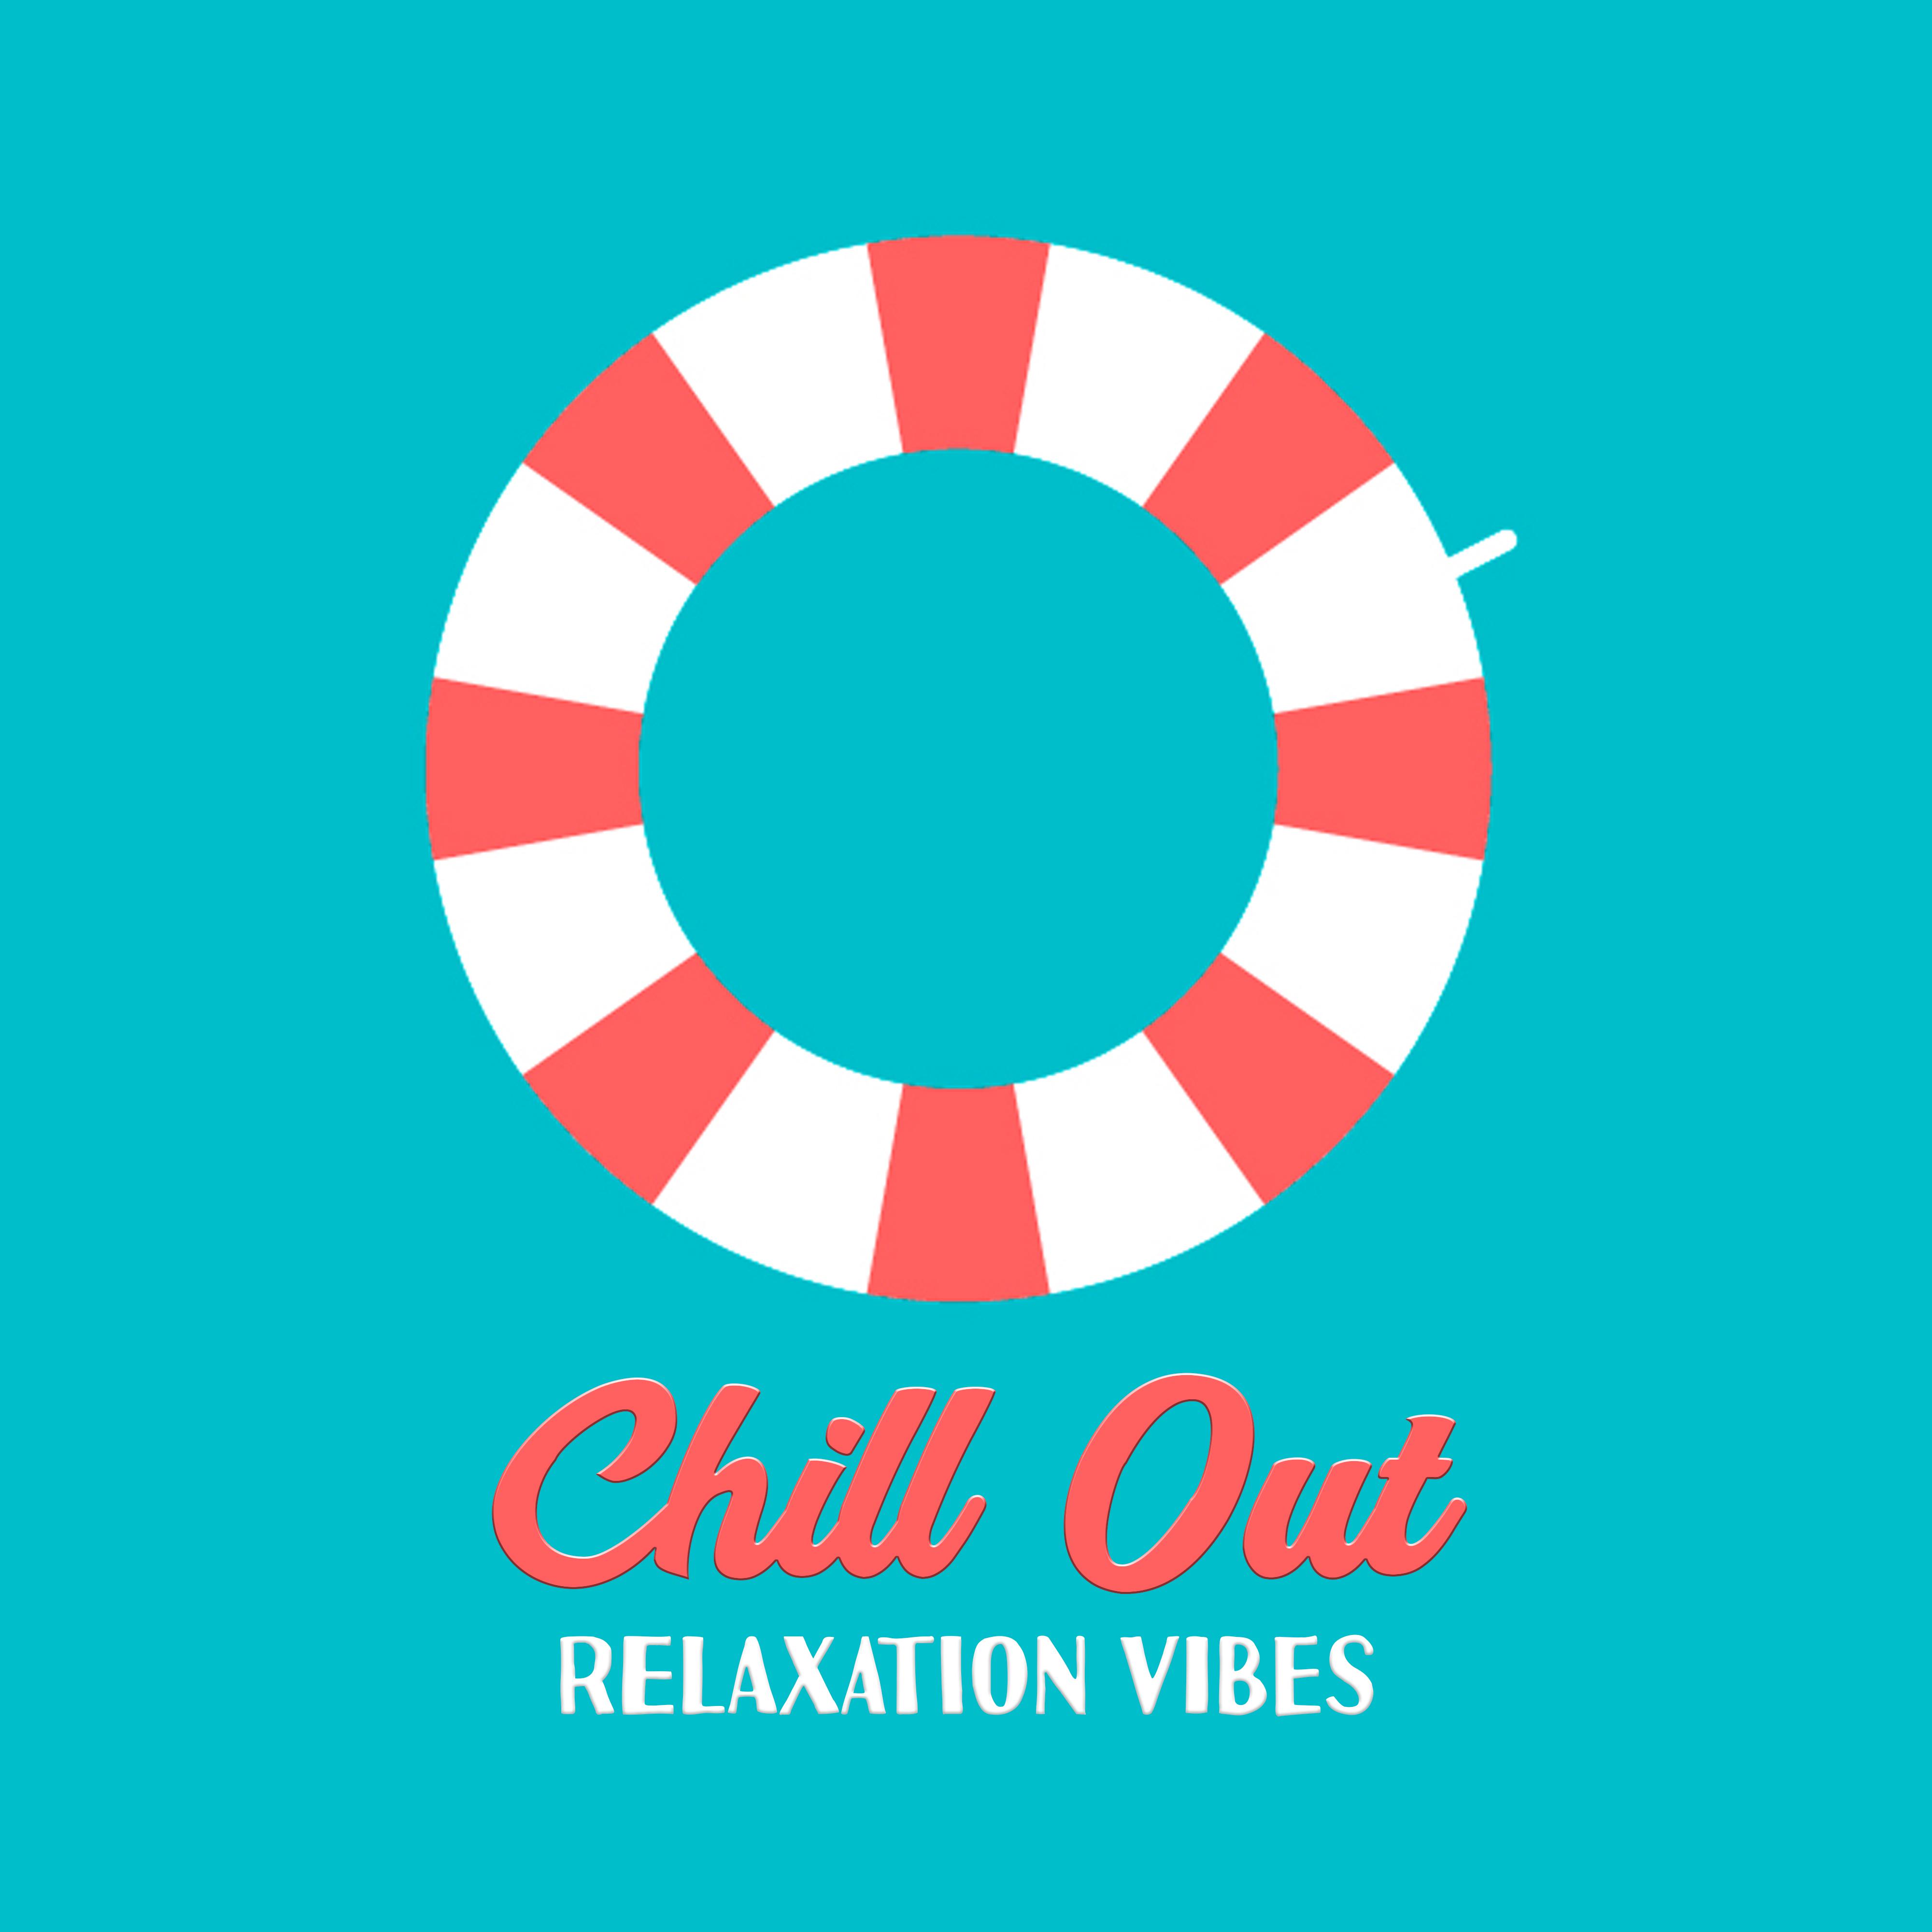 Chill Out Relaxation Vibes